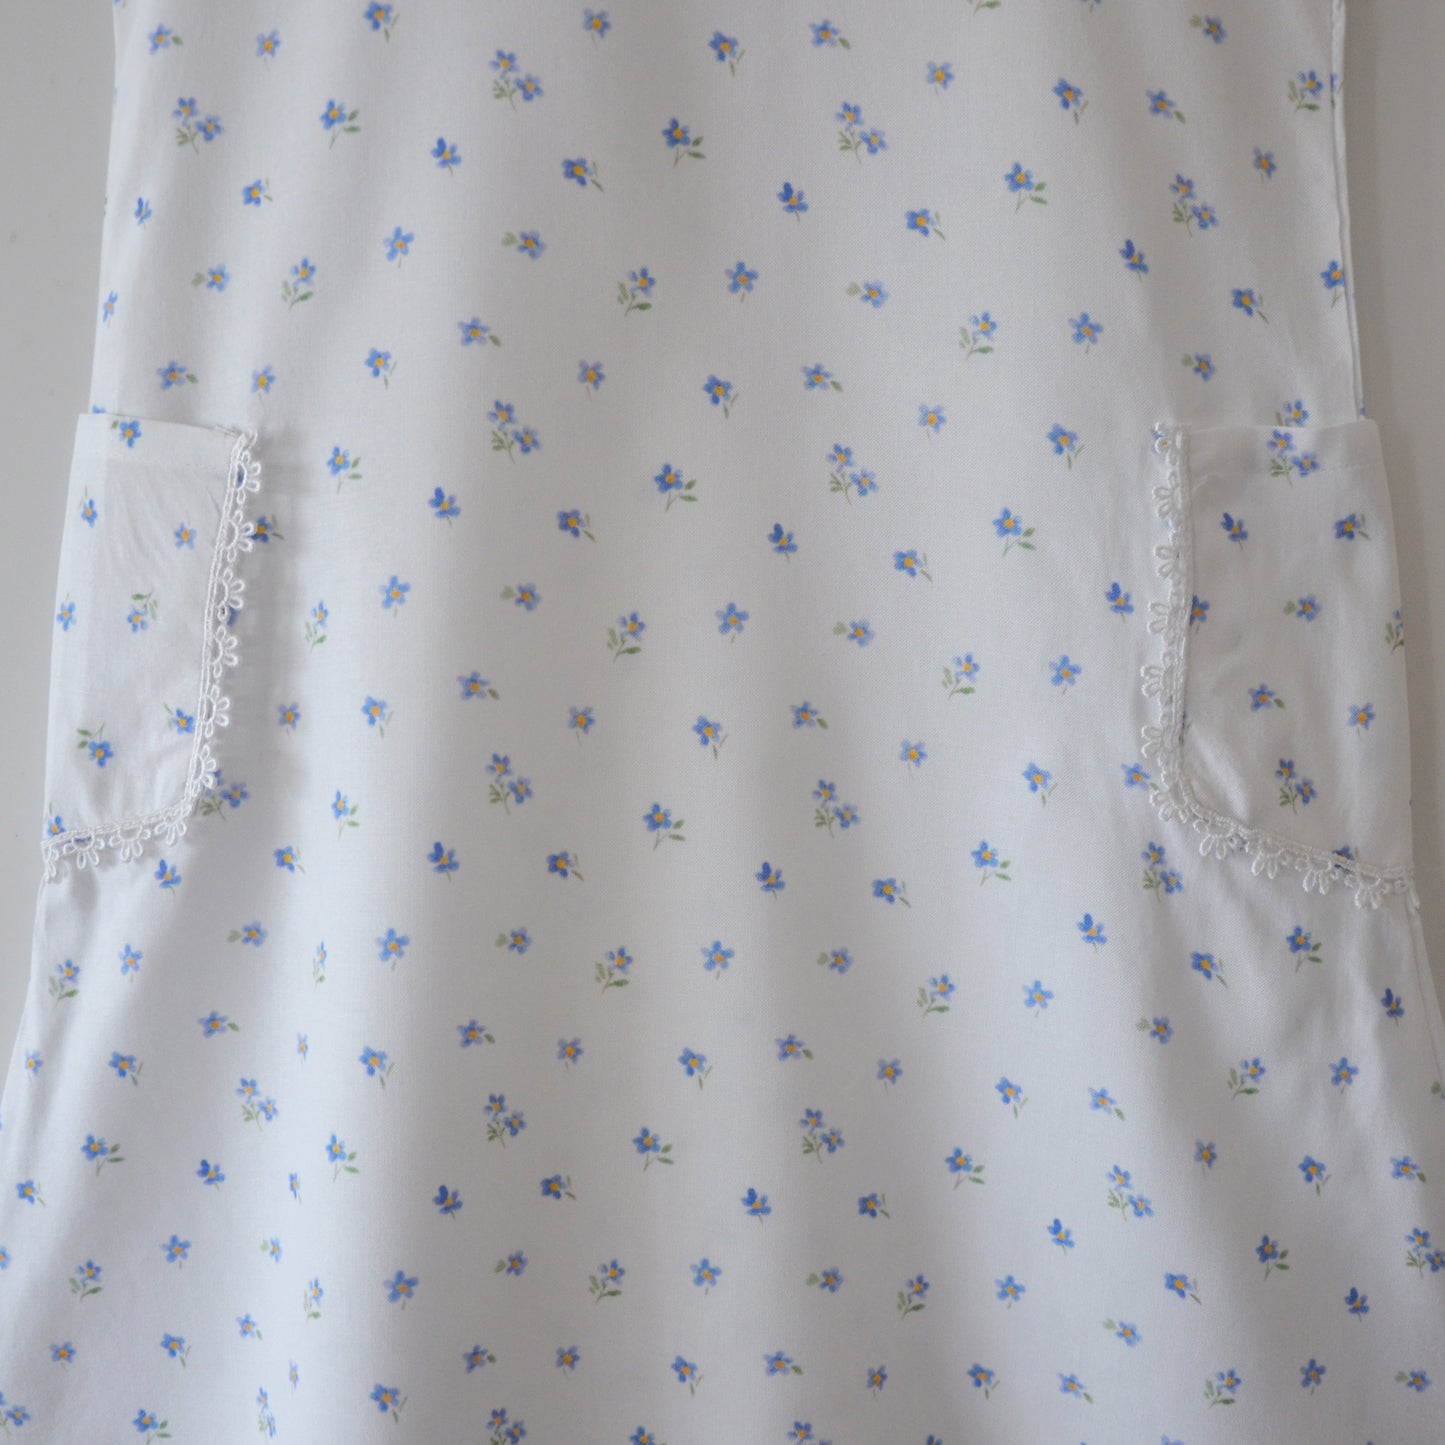 Madeline dress in blue flower print with pockets - White